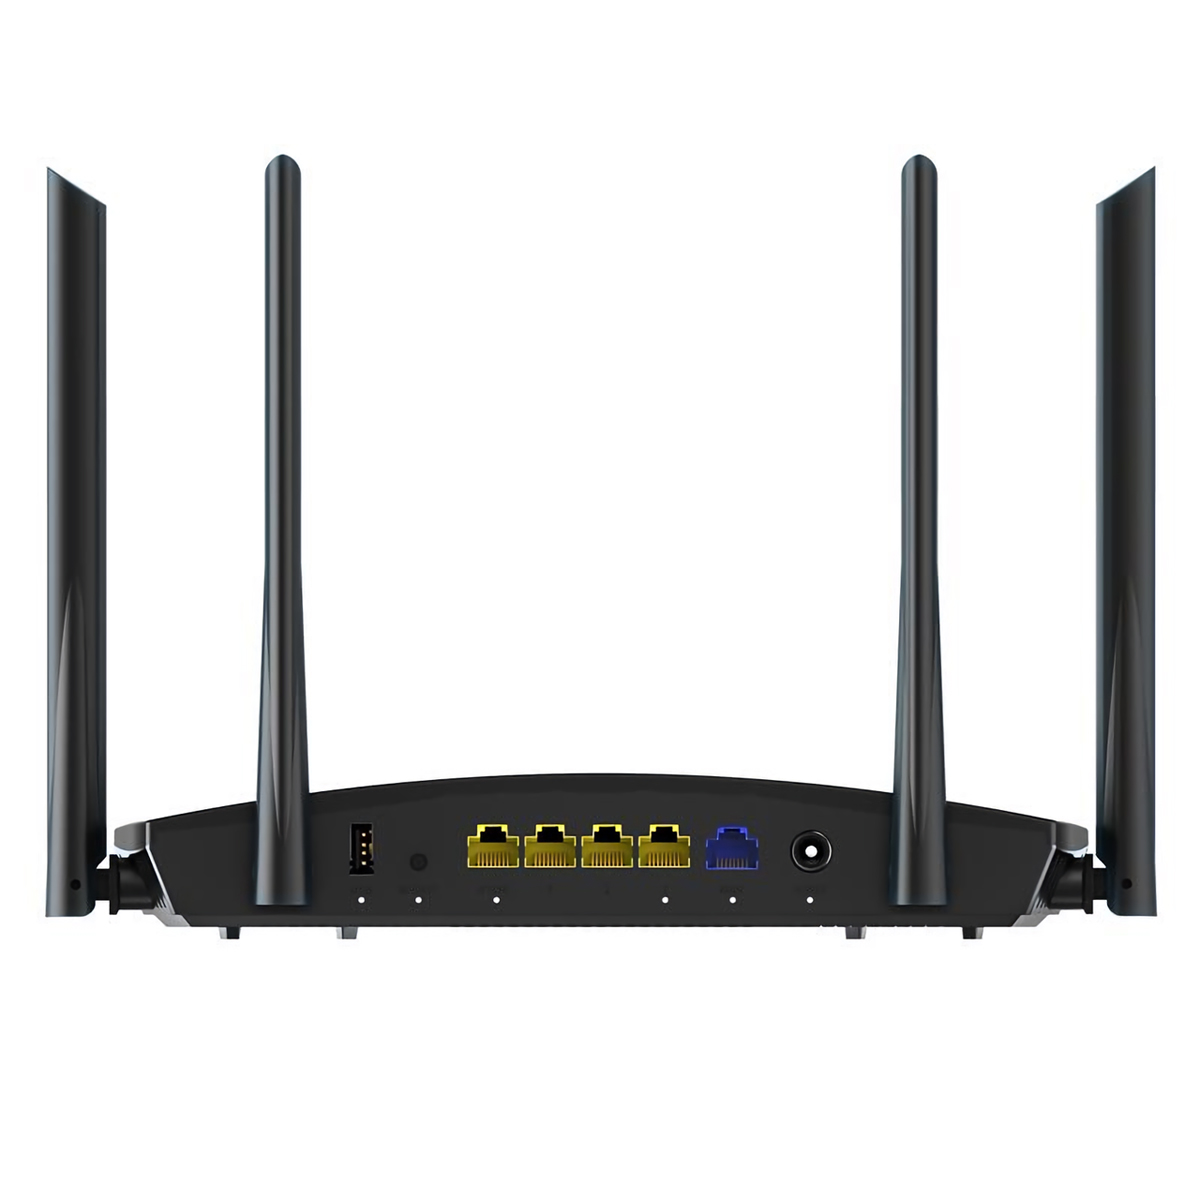 Find Speedefy AC2100 Dual Band High Speed Wireless WiFi Router 2.4GHz&5GHz Up to 35 Devices 2000 sq.ft Coverage 4X4 MU-MIMO for Streaming & Gaming for Sale on Gipsybee.com with cryptocurrencies